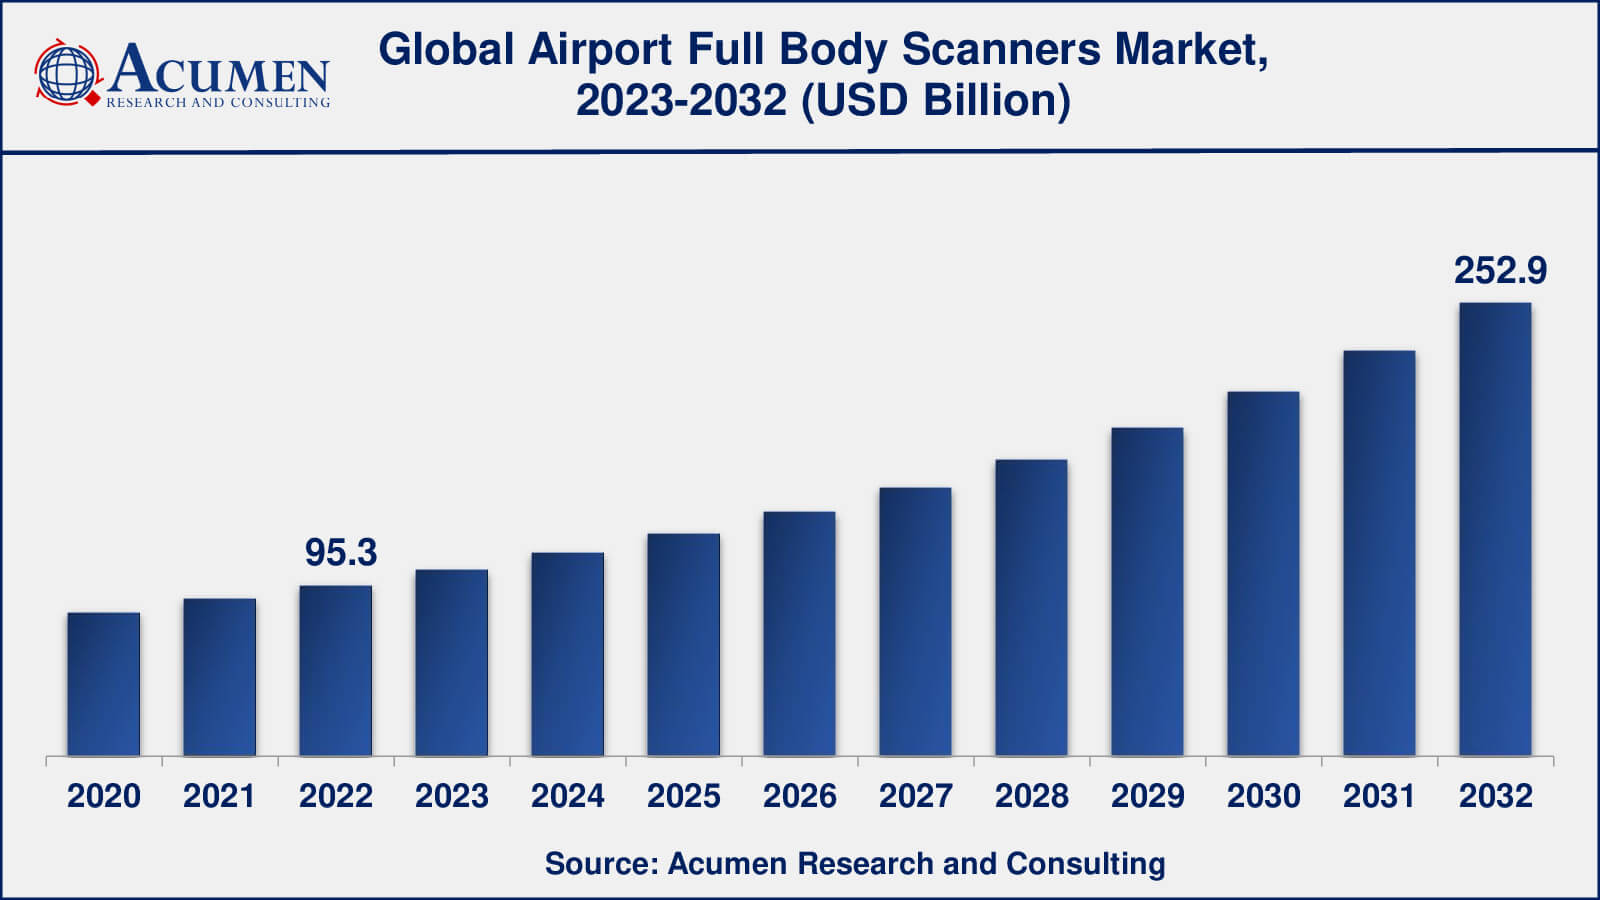 Global Airport Full Body Scanners Market Dynamics